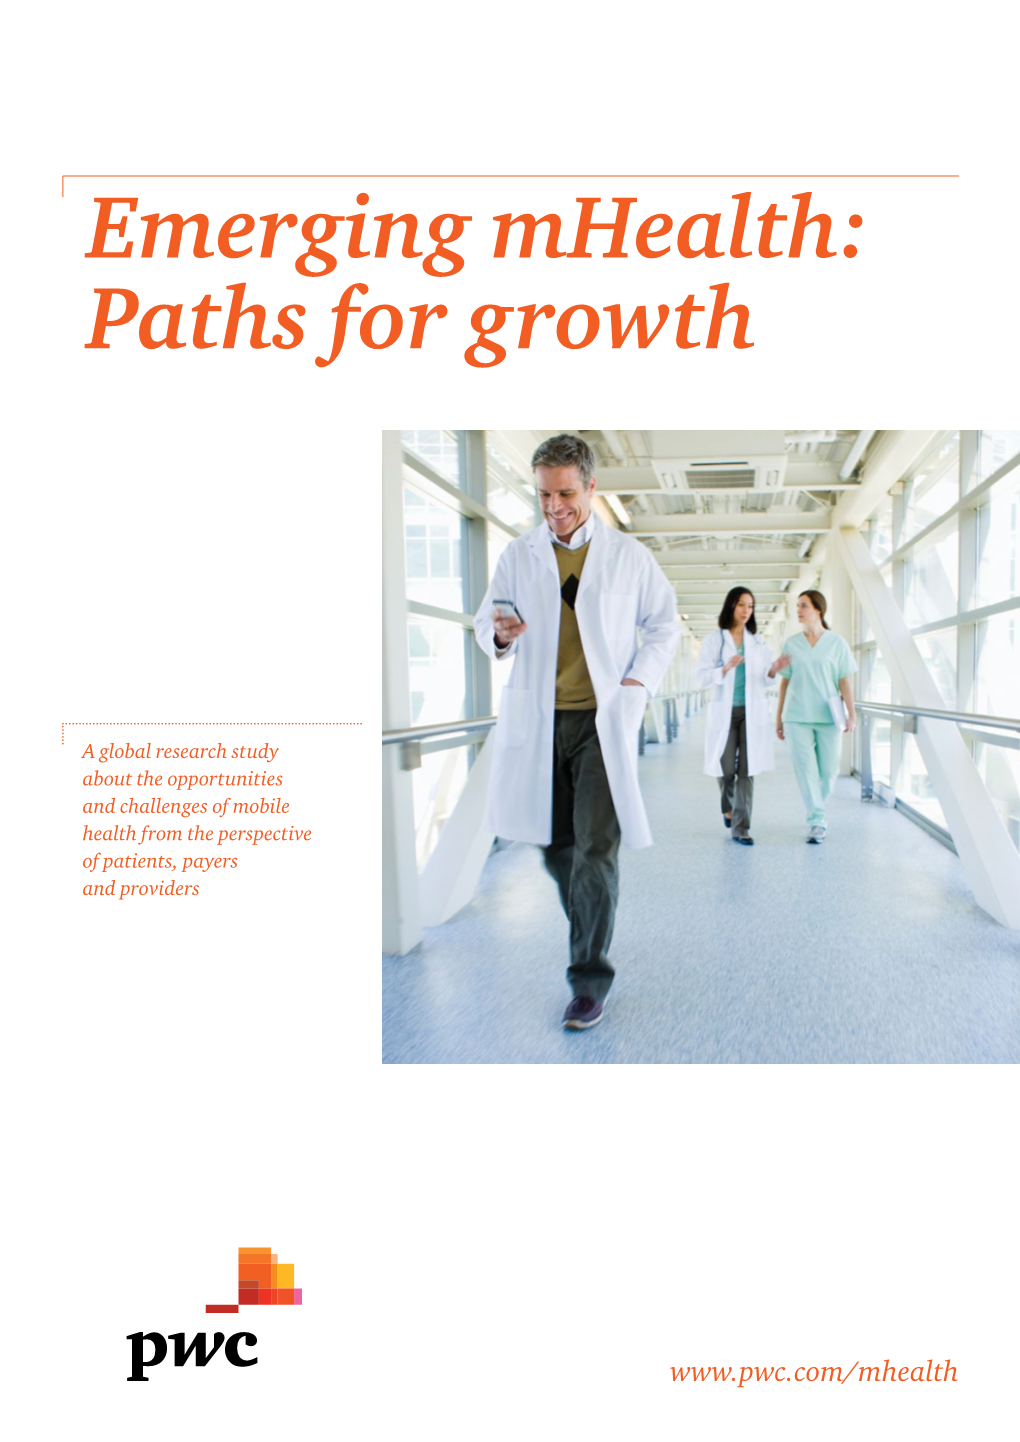 Emerging Mhealth: Paths for Growth